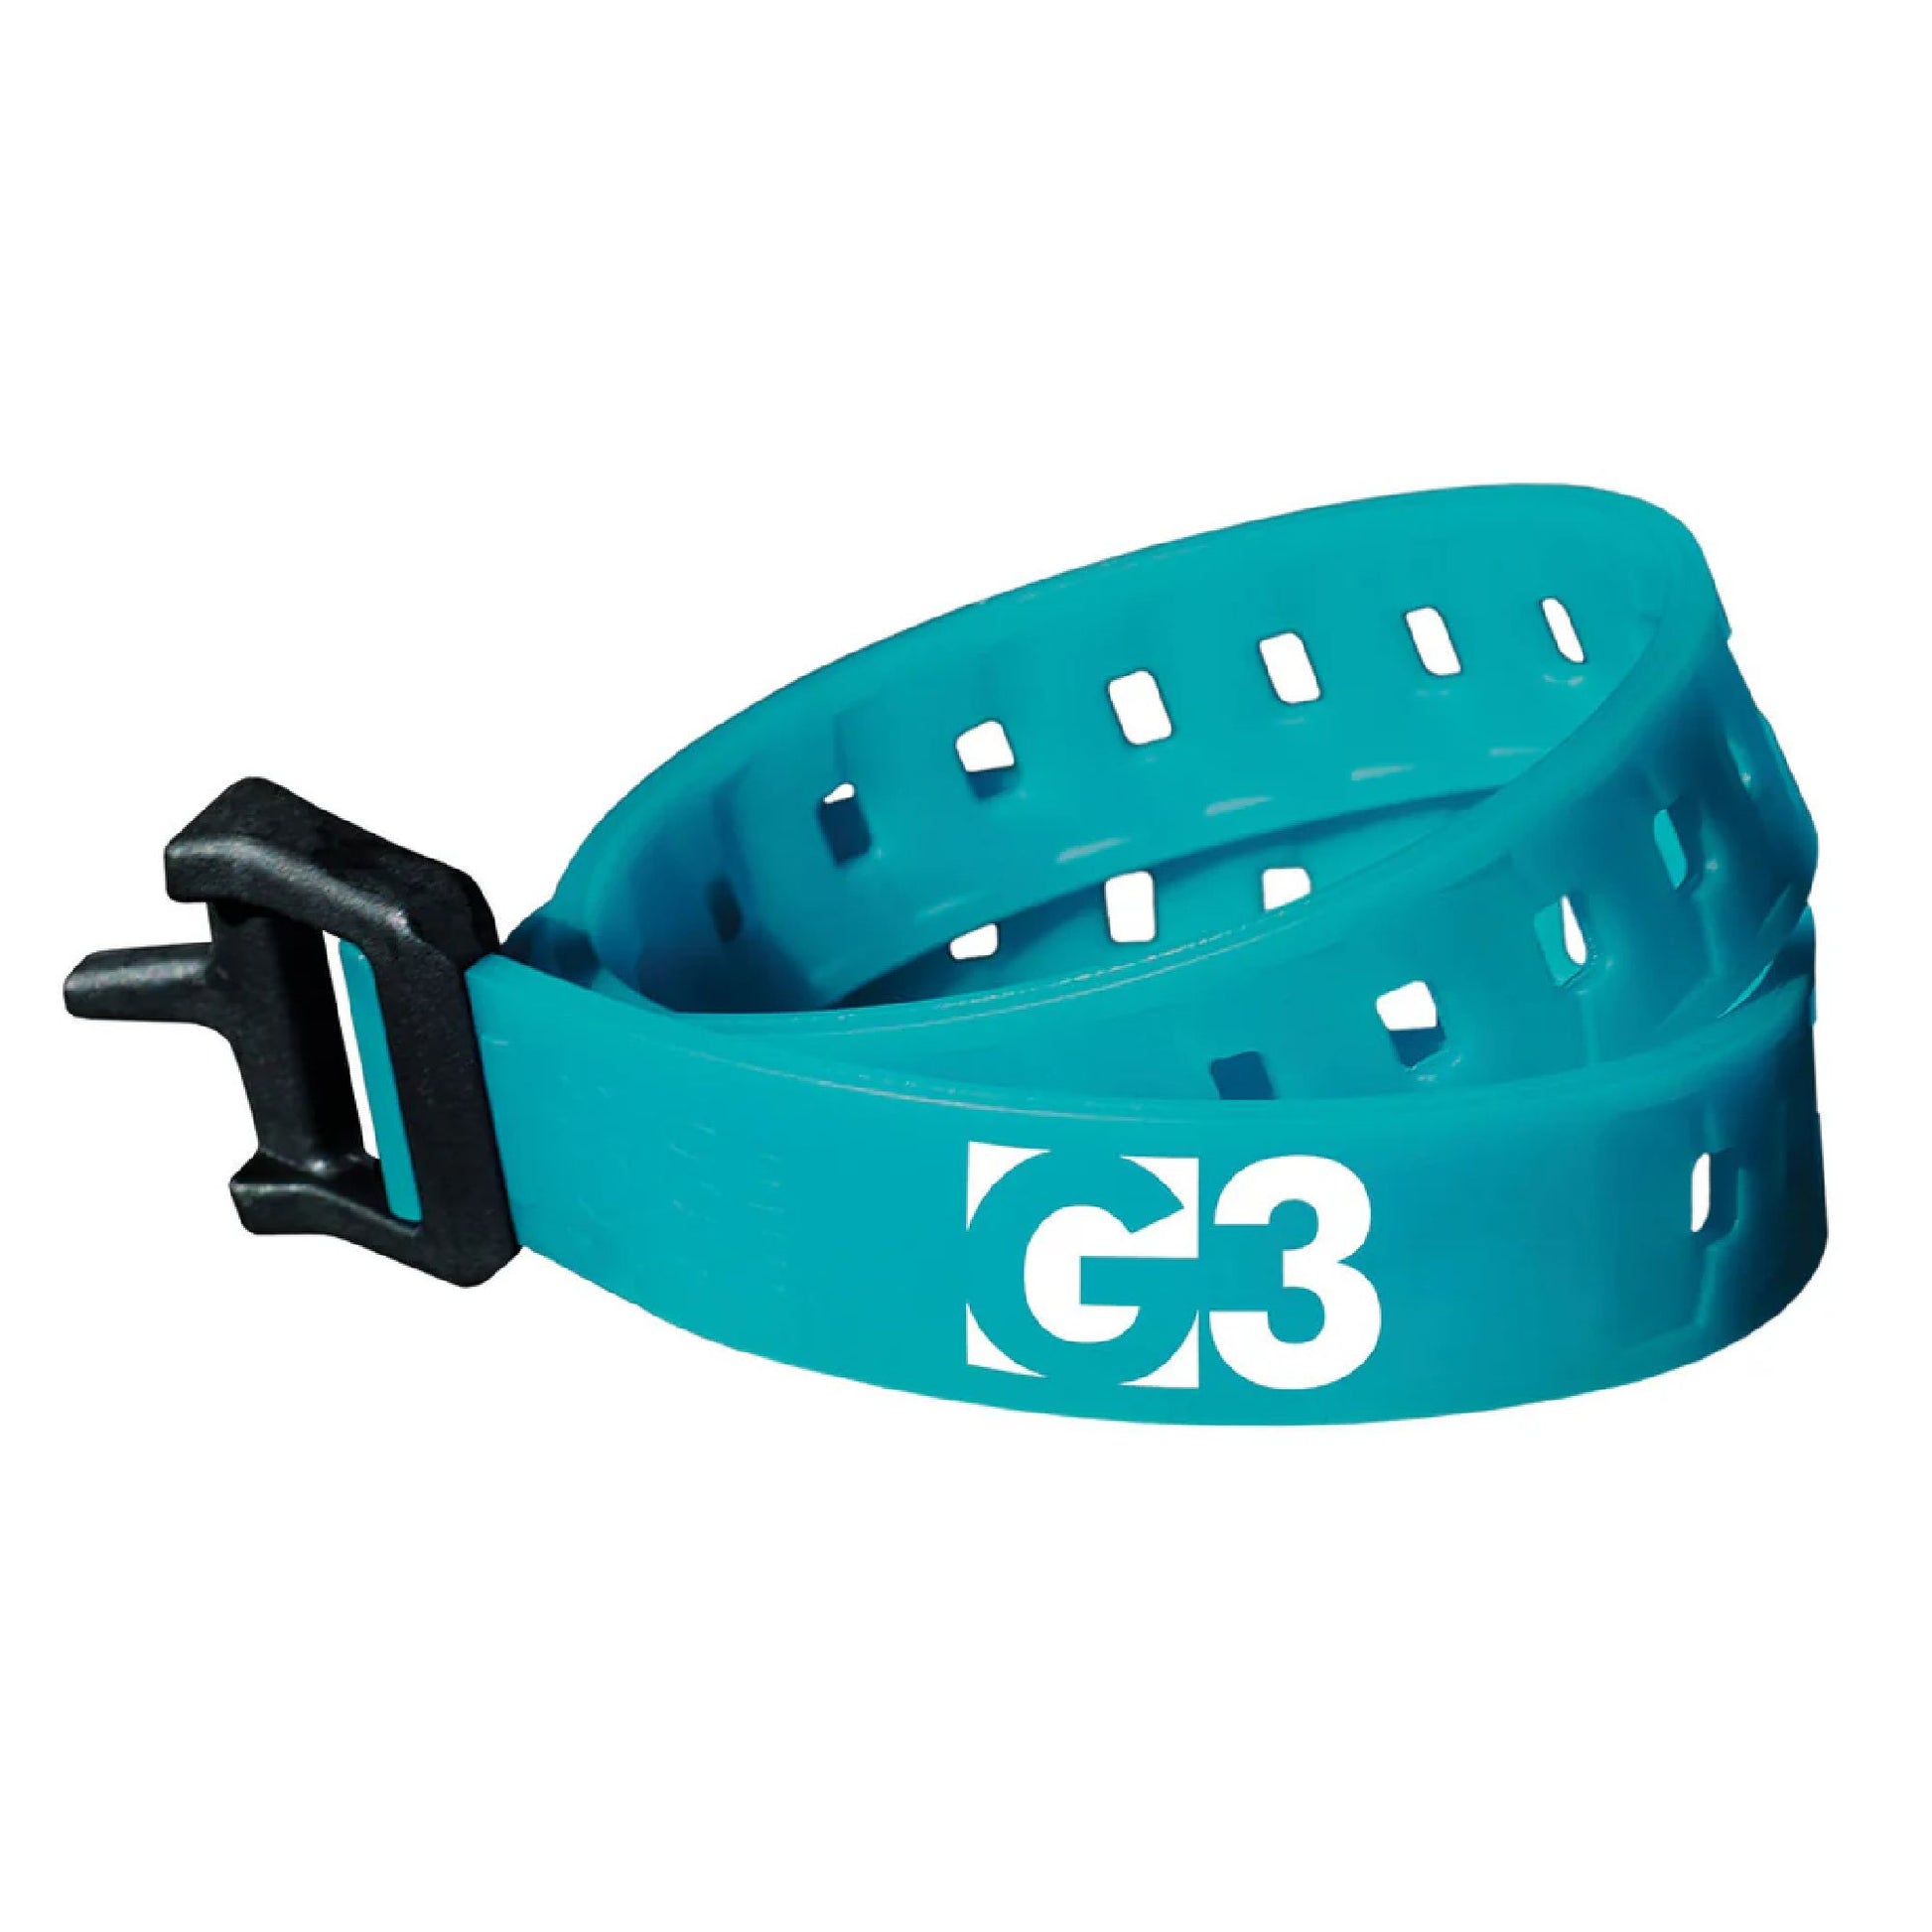 G3 Tension Strap Teal 650mm Snow Parts